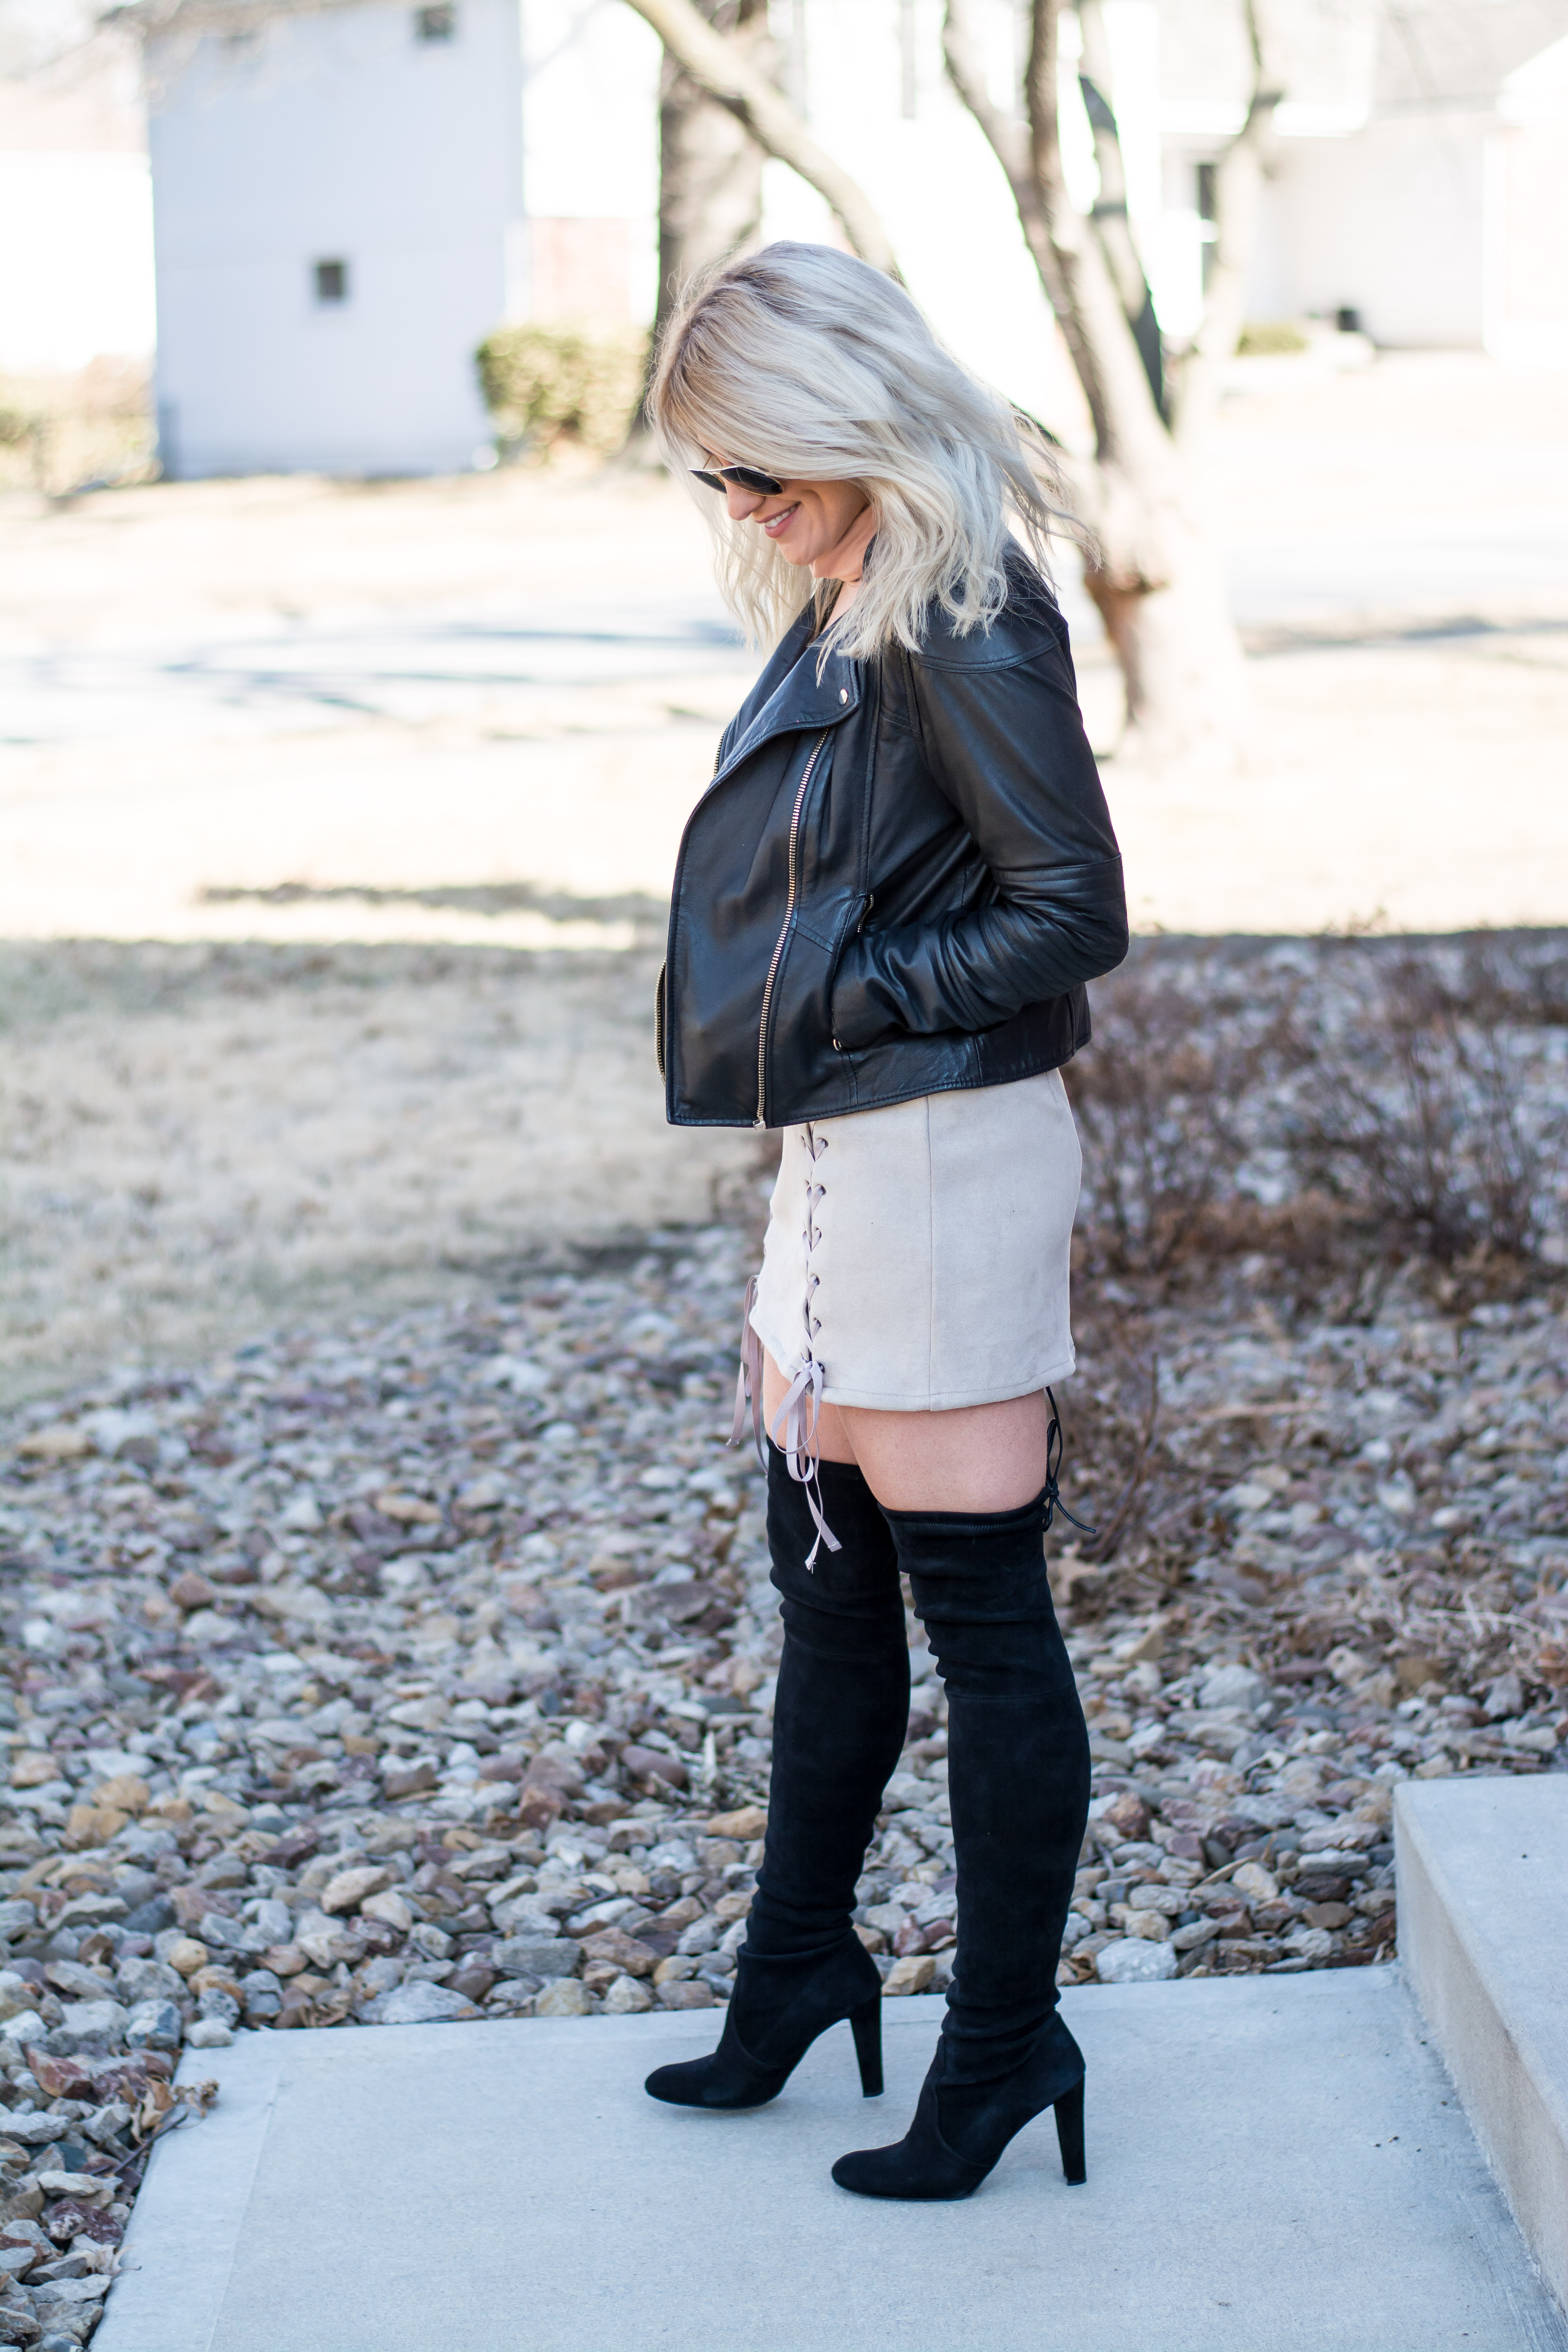 Spring Outfit: Suede Mini Skirt + Tall Boots. | Ashley from LSR